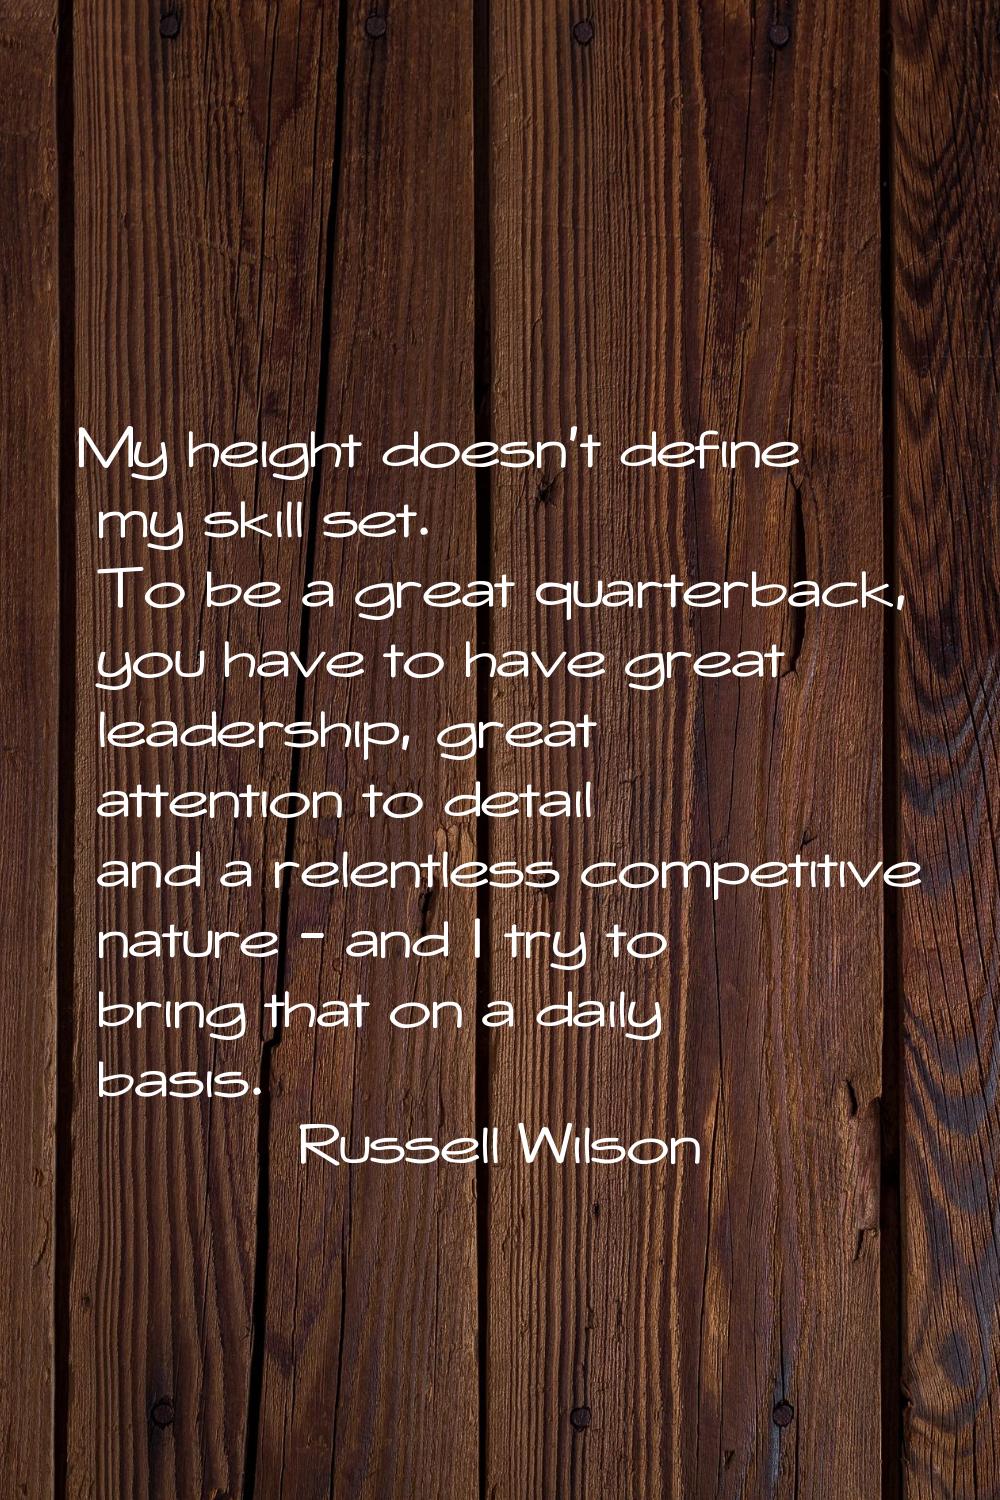 My height doesn't define my skill set. To be a great quarterback, you have to have great leadership